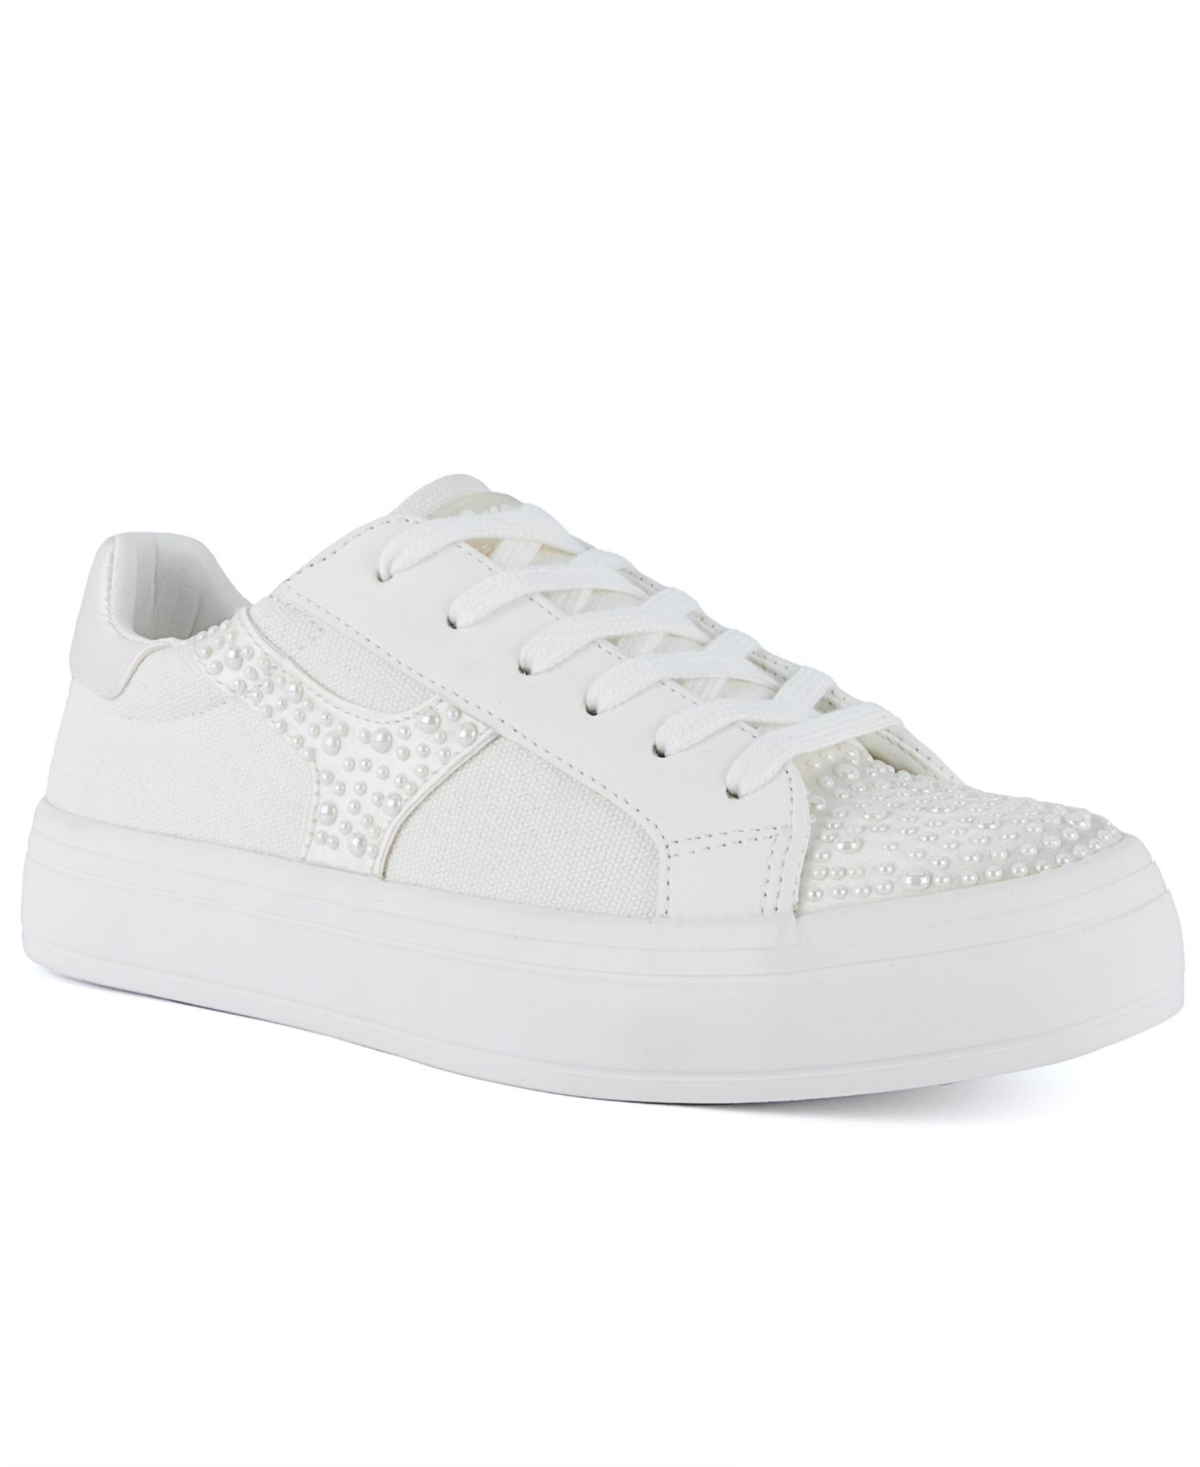 Women's Stallion Lace-Up Sneakers - White